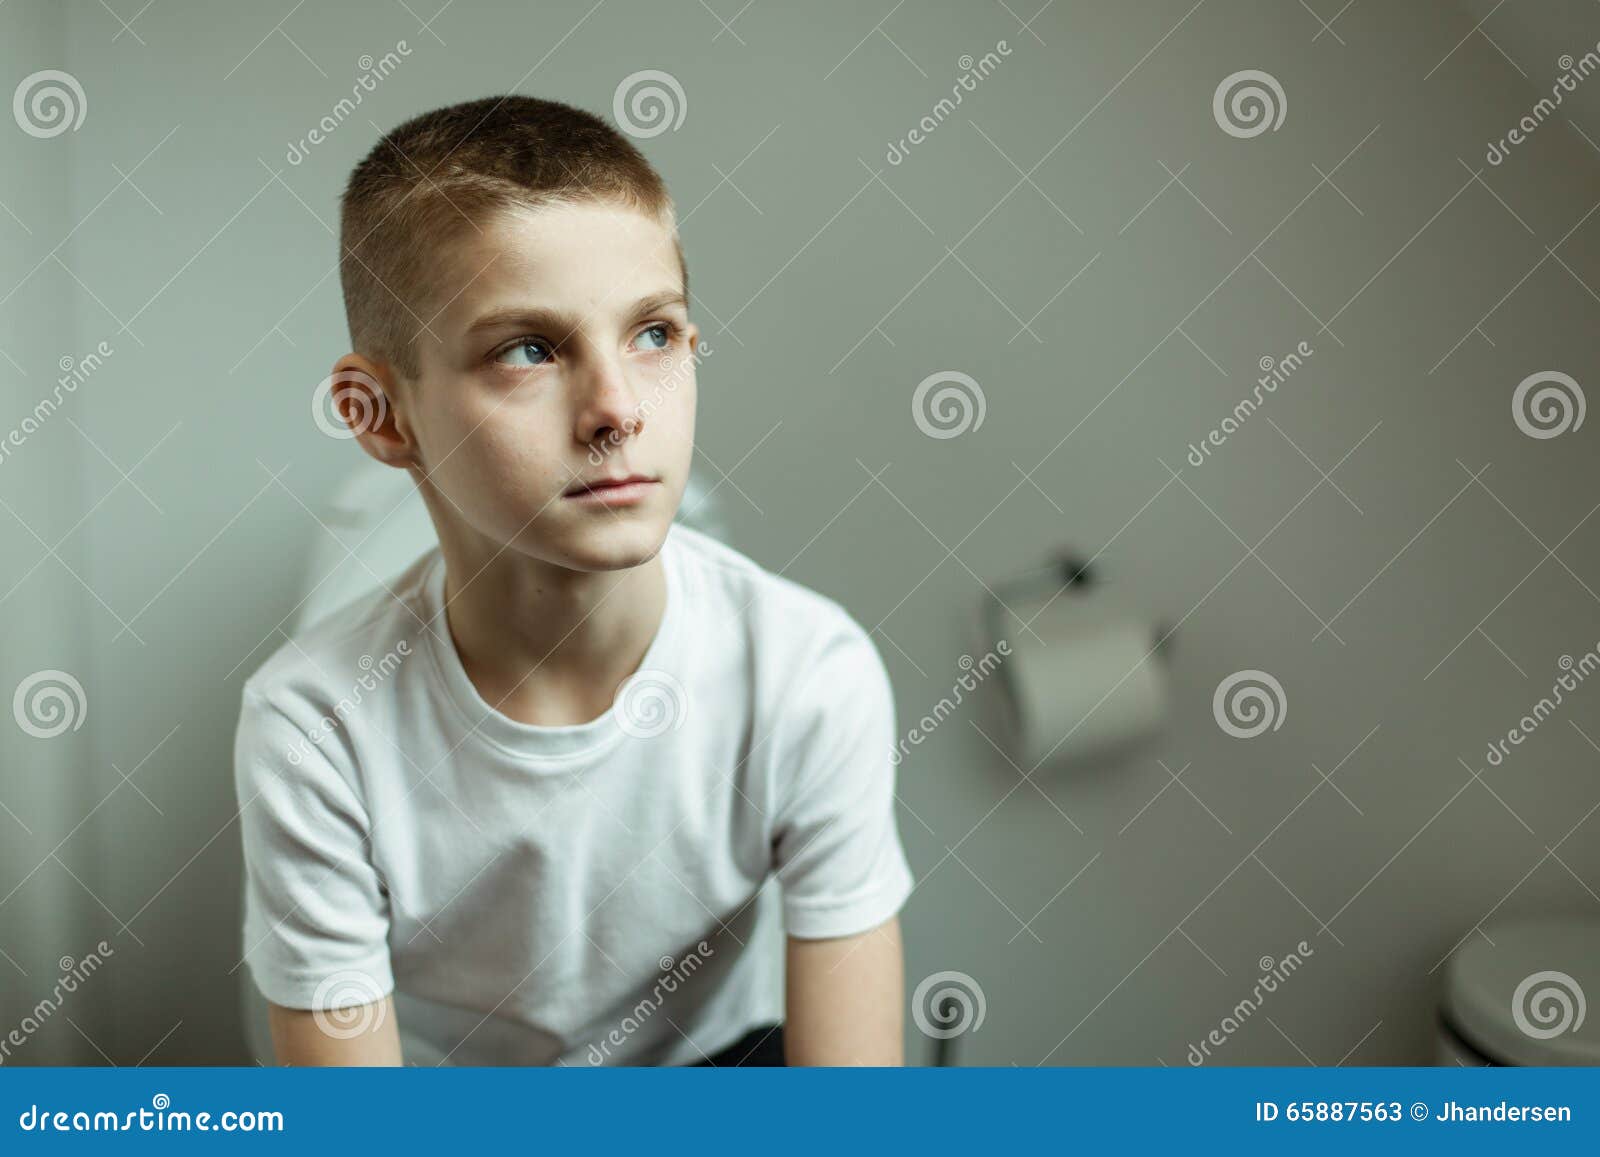 Thoughtful Young Boy Sitting on Toilet Seriously Stock Image ...